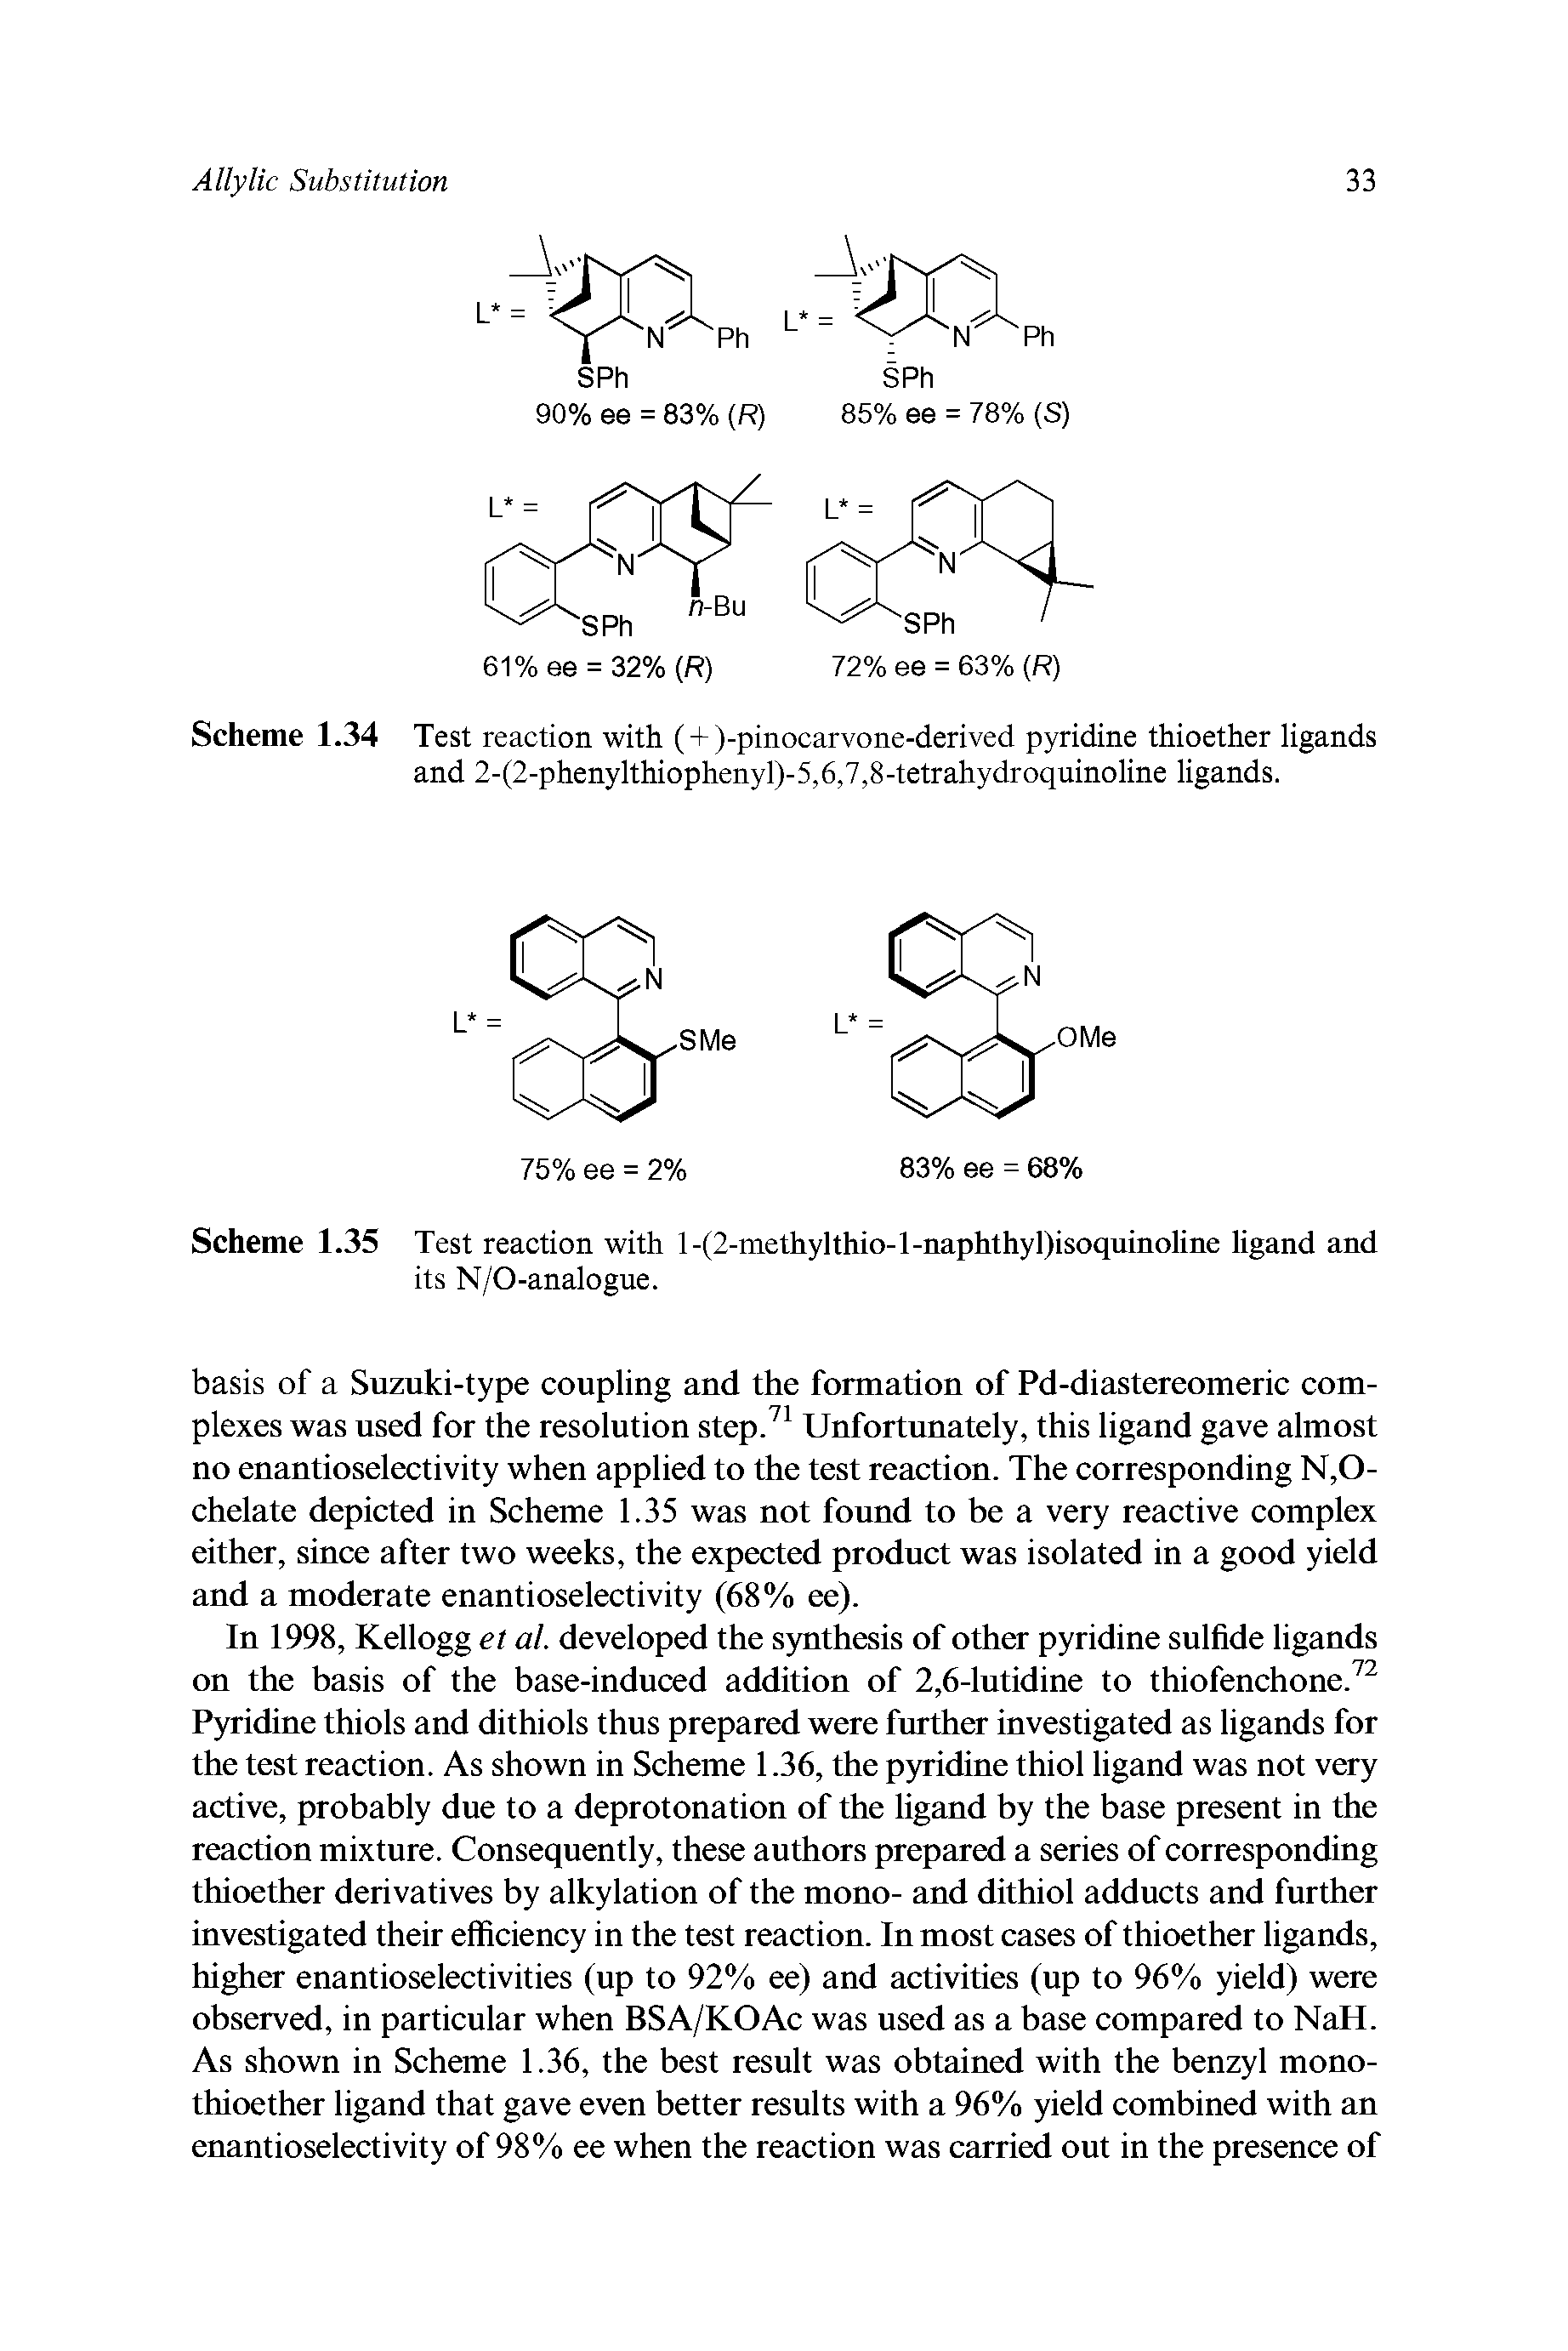 Scheme 1.35 Test reaction with l-(2-methylthio-l-naphthyl)isoquinoline ligand and its N/O-analogue.